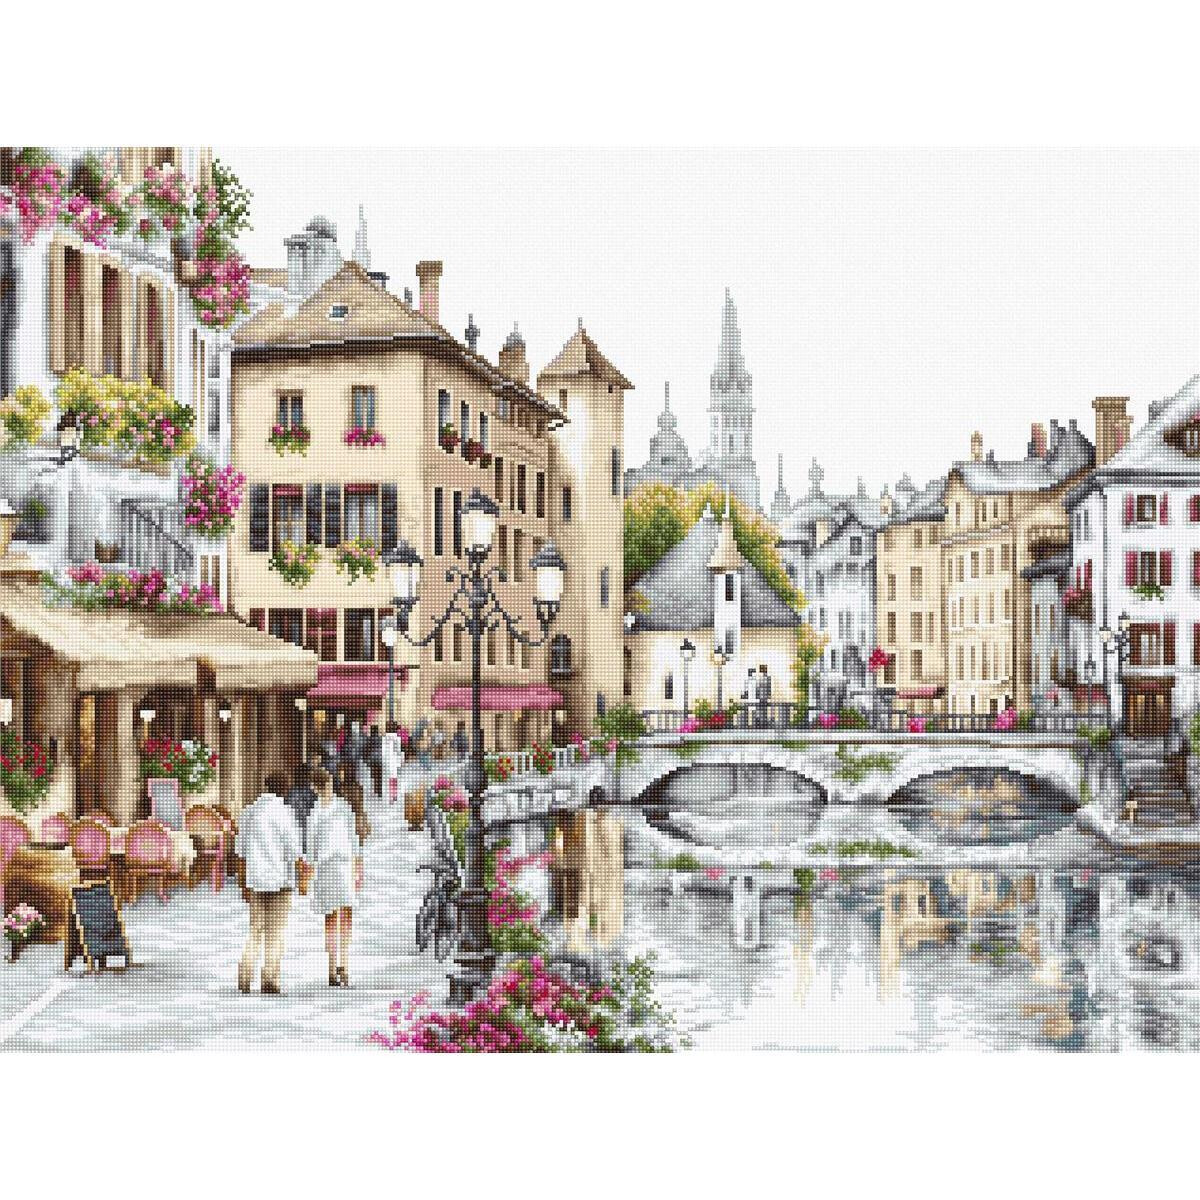 A picturesque European street scene shows a picturesque...